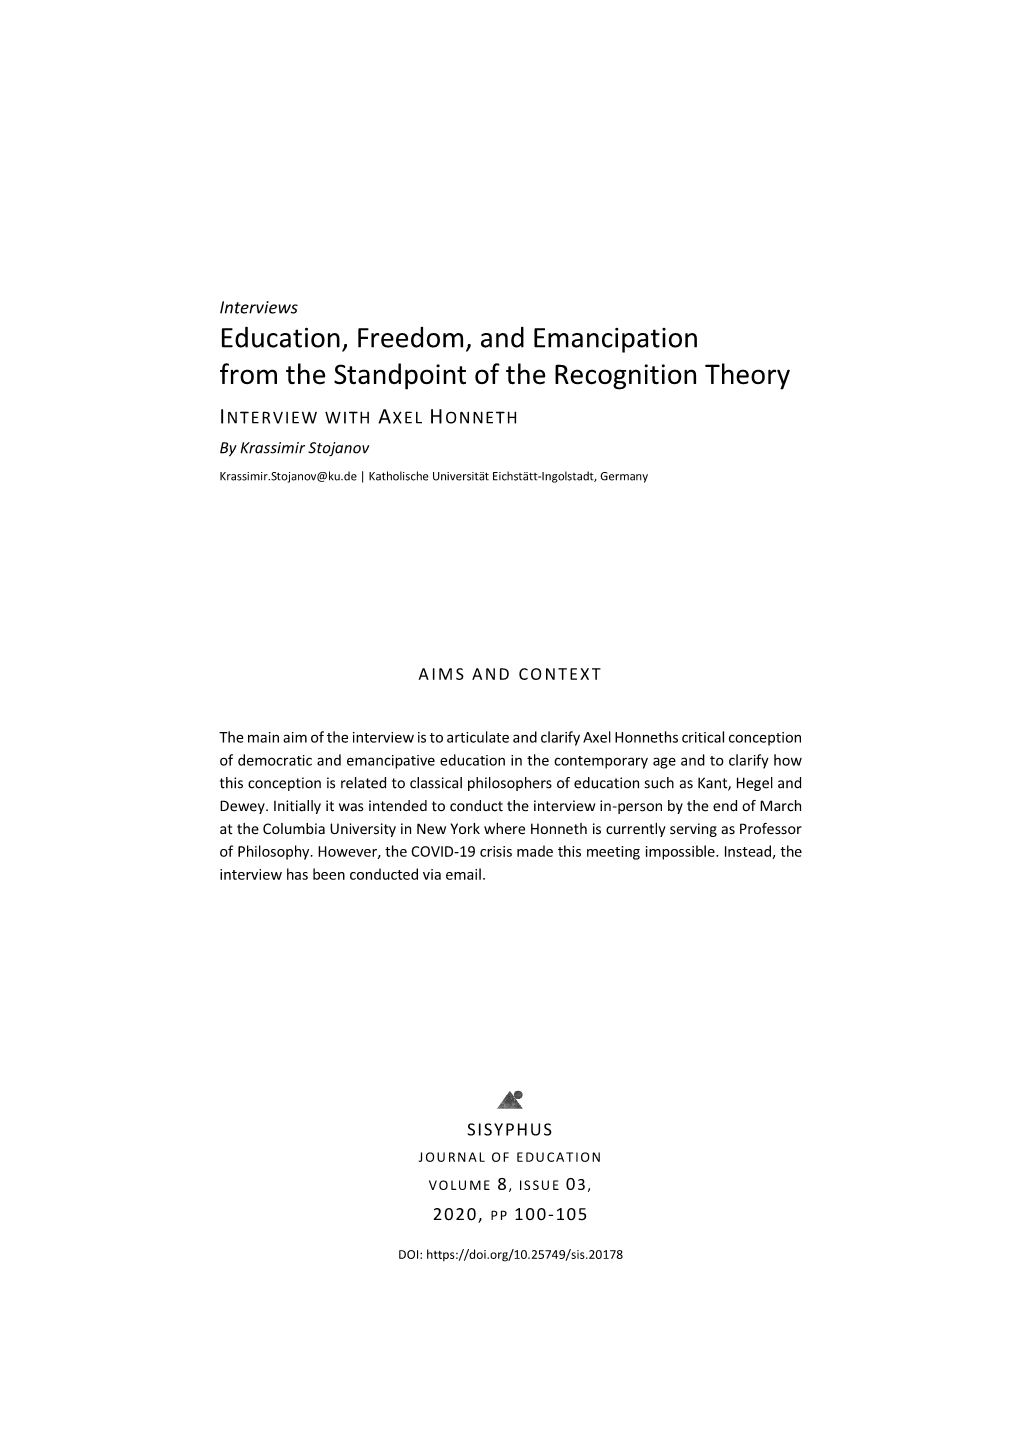 Education, Freedom, and Emancipation from the Standpoint of the Recognition Theory INTERVIEW with AXEL HONNETH by Krassimir Stojanov